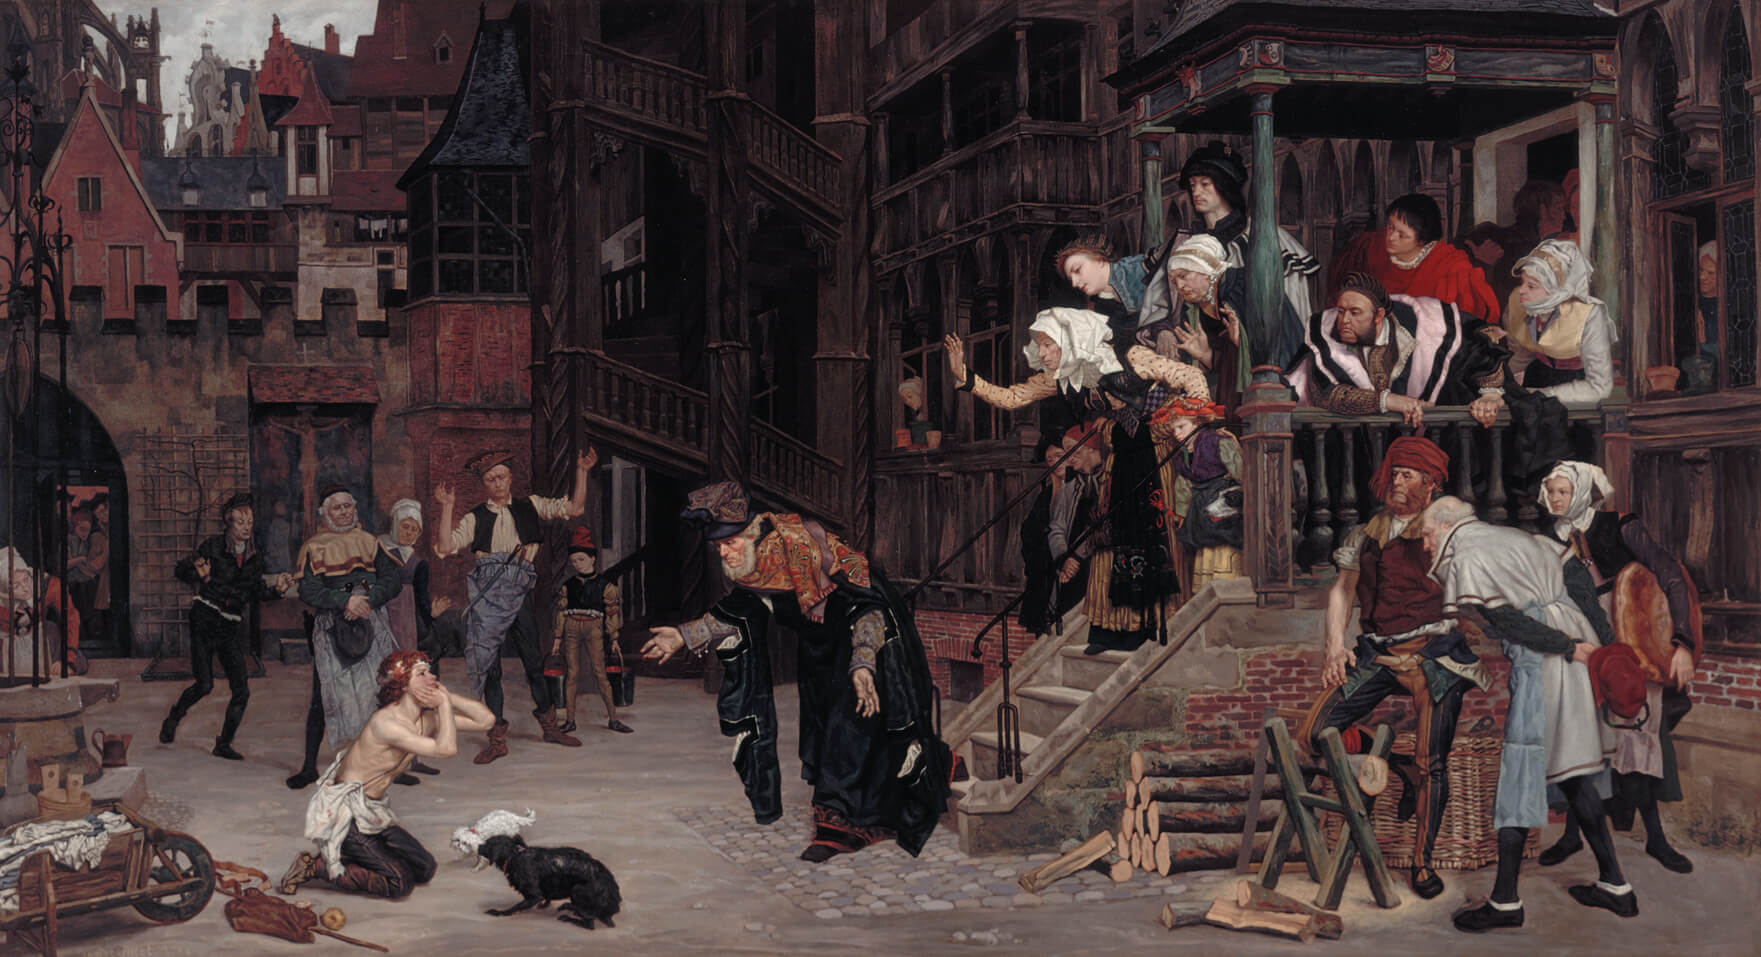 james tissot's painting of the prodigal son's return